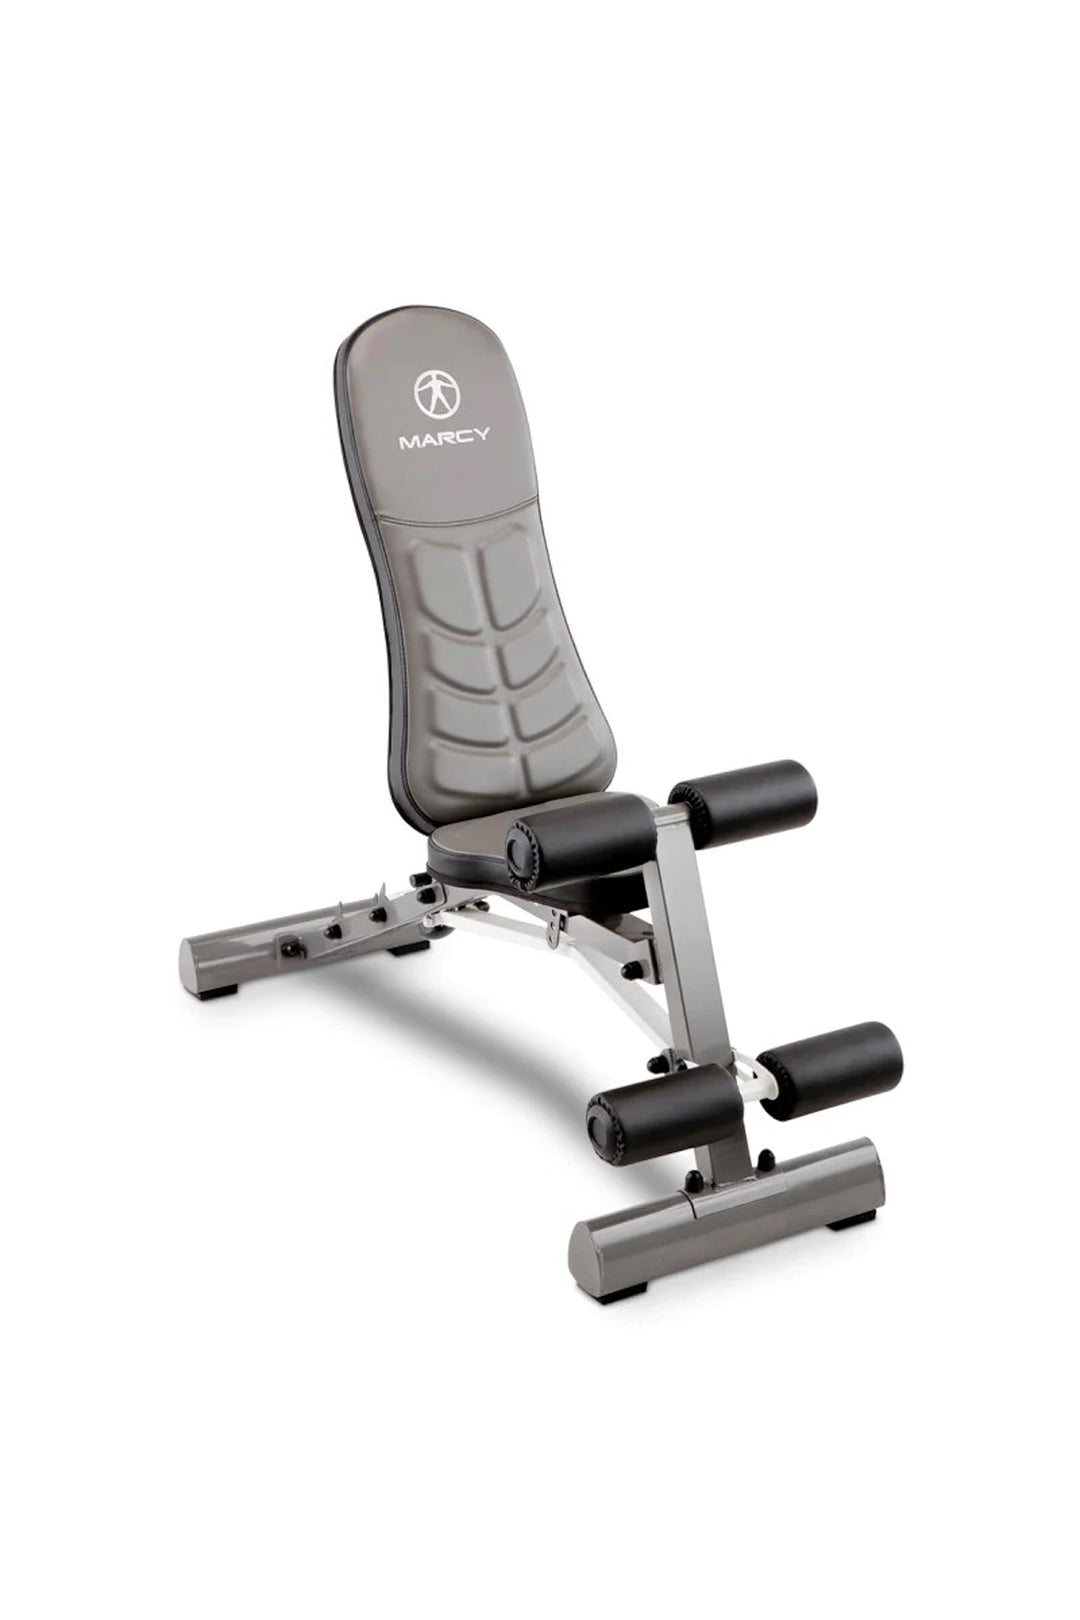 Grey and black Marcy utility weight bench